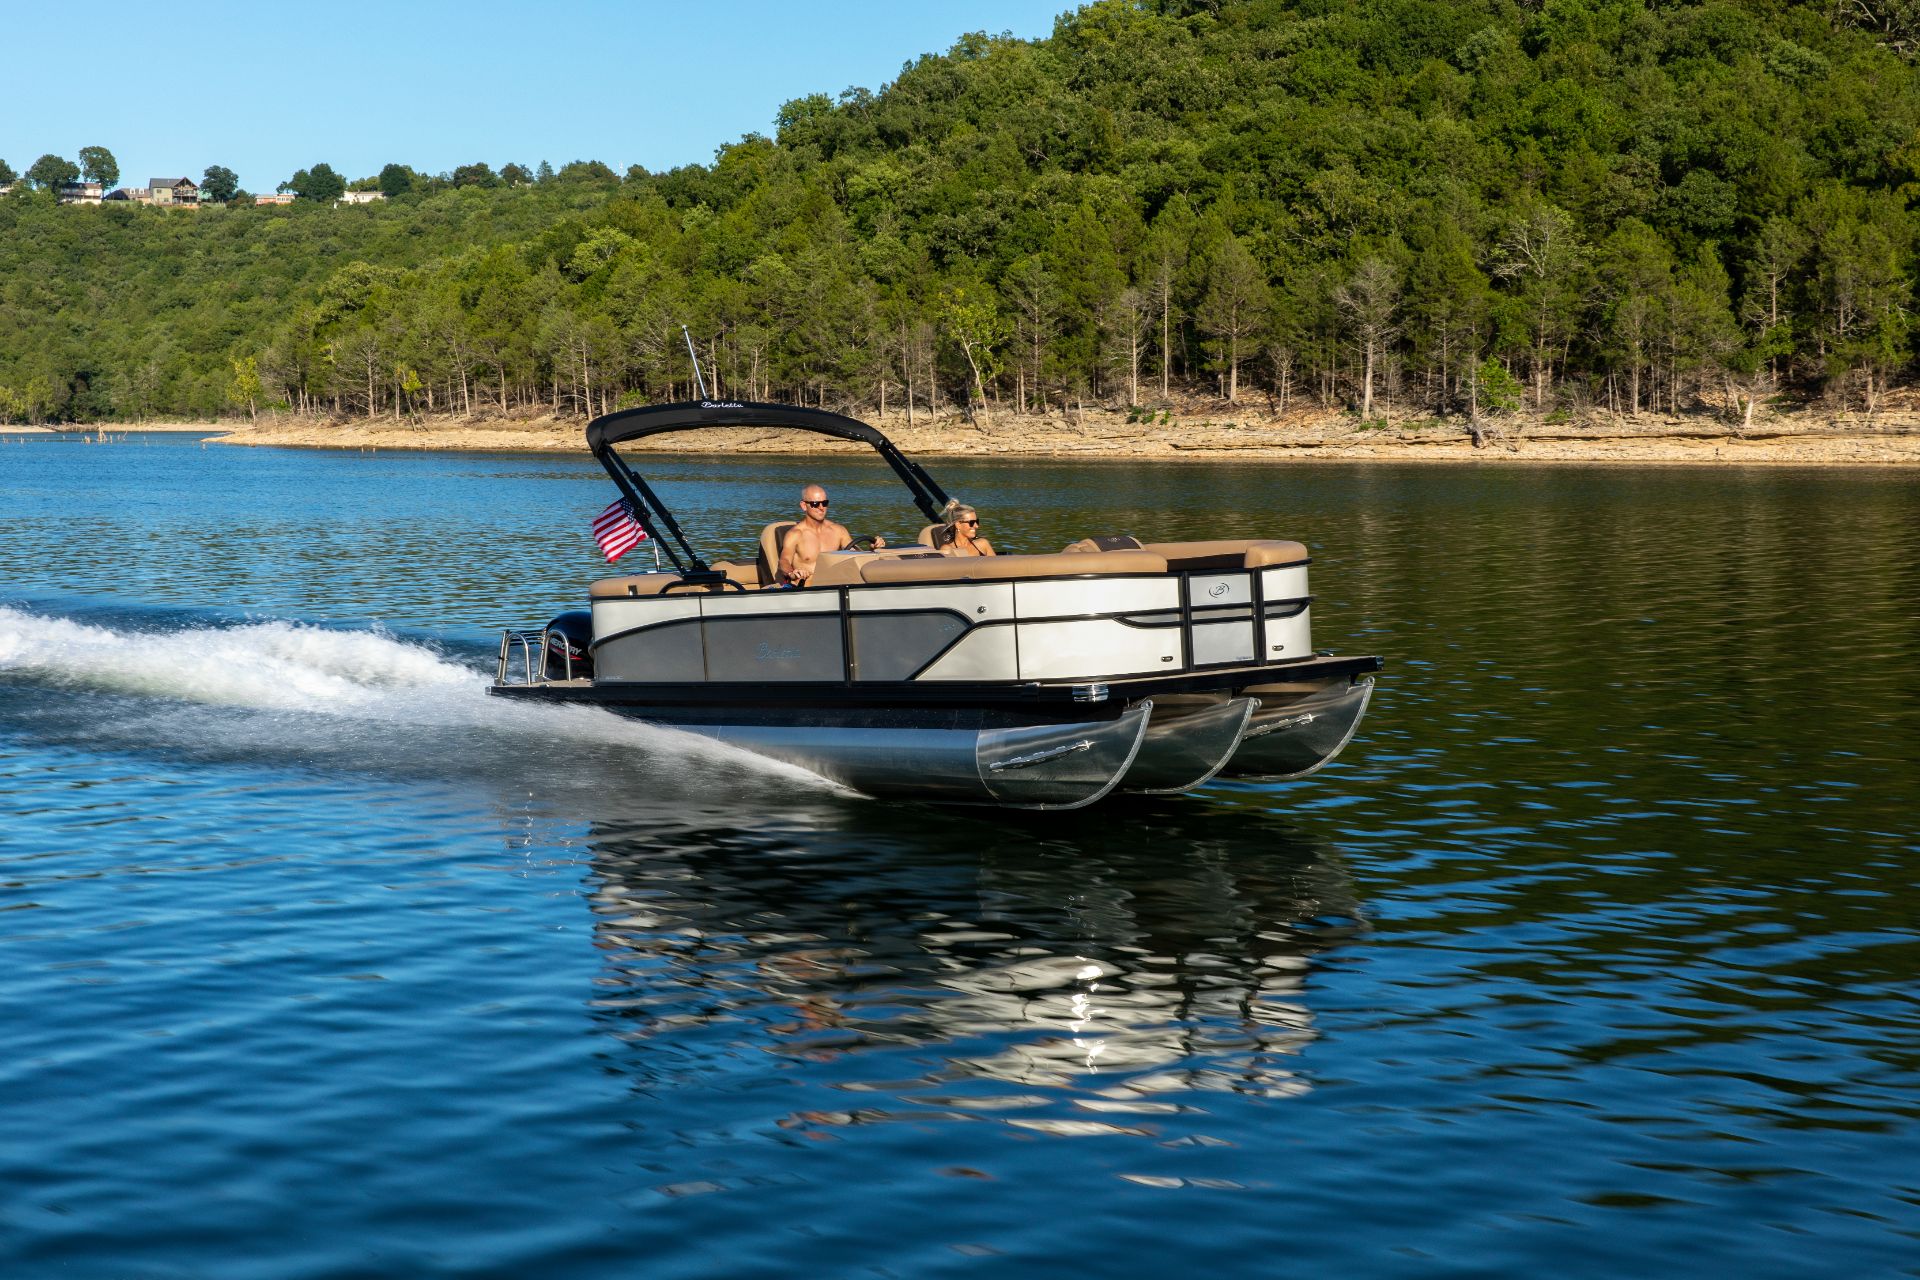 Don’t Make These 5 Mistakes at a Boat Show (Shopper’s Guide)